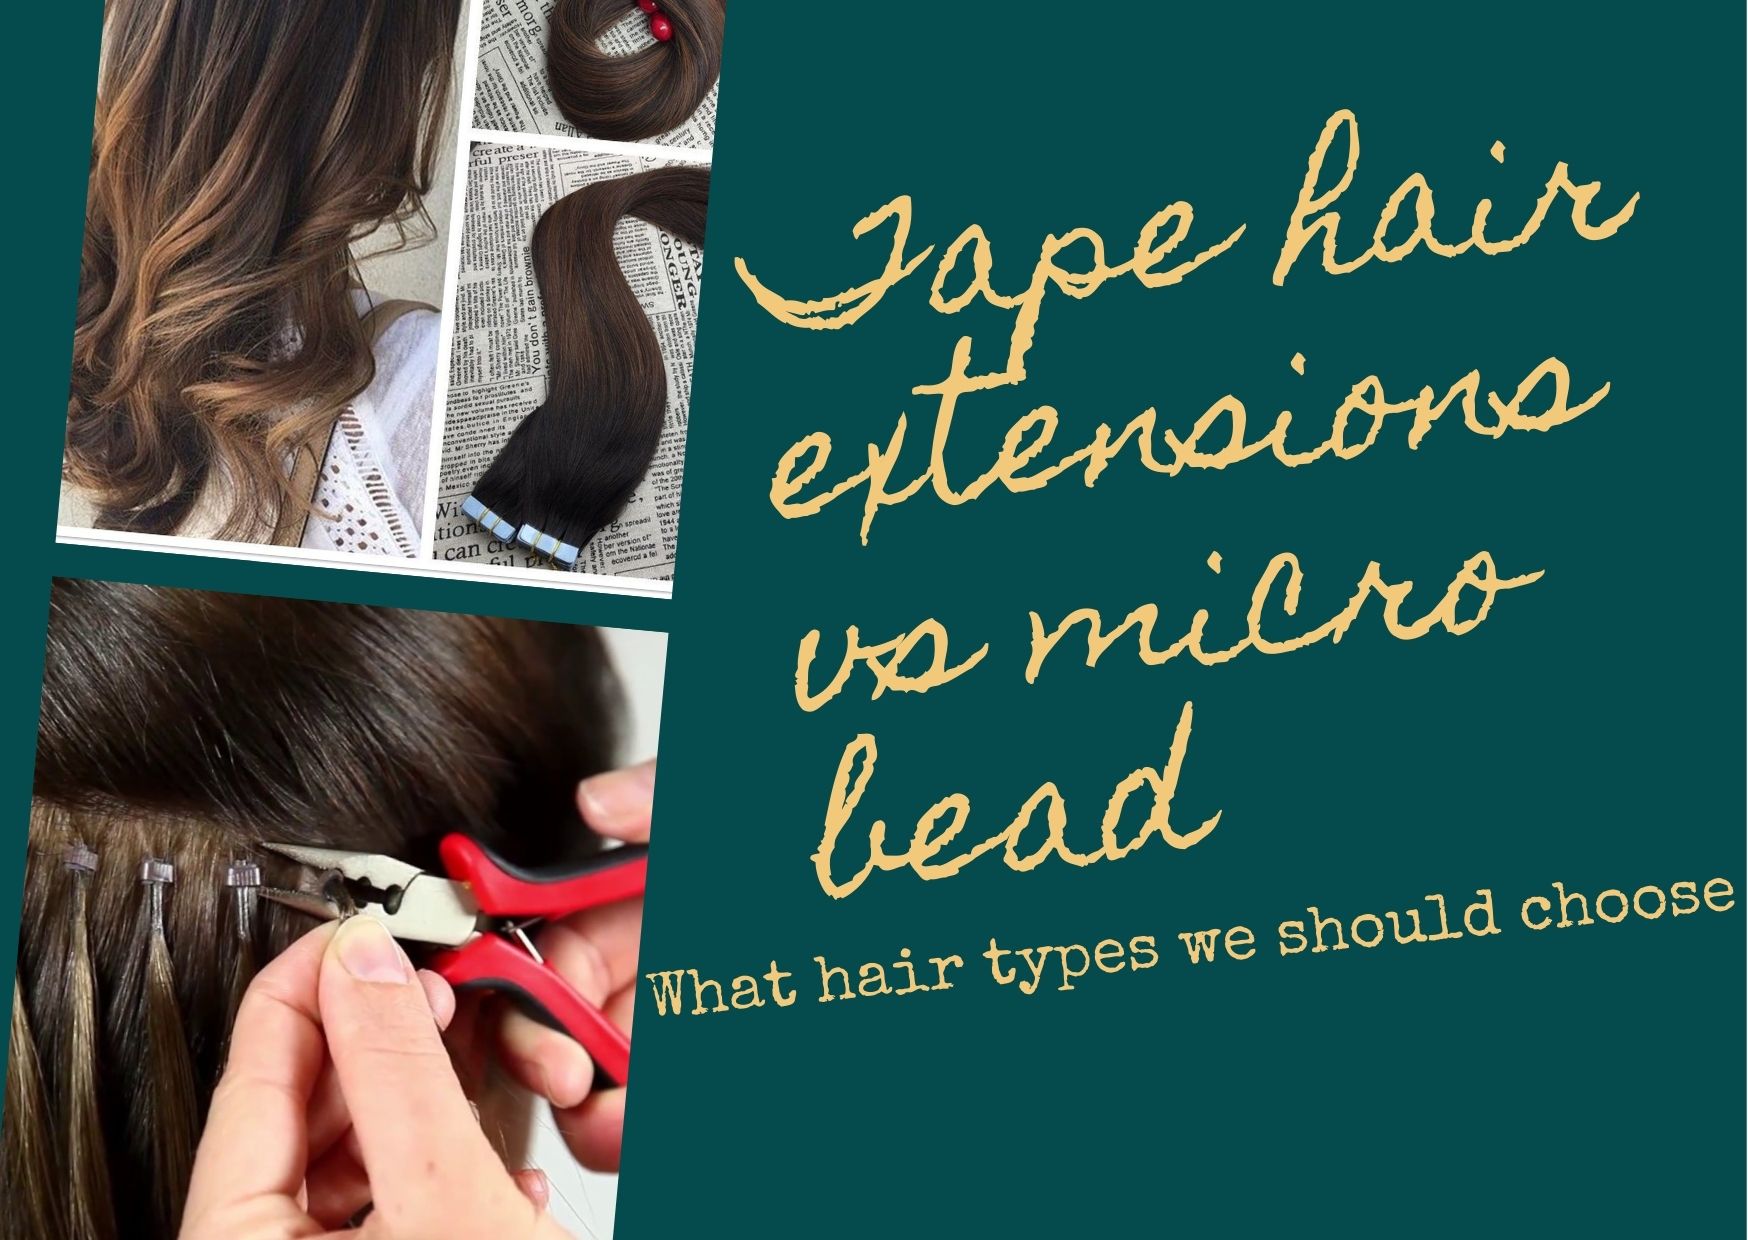 Tape hair extensions vs micro bead: What hair type we should choose